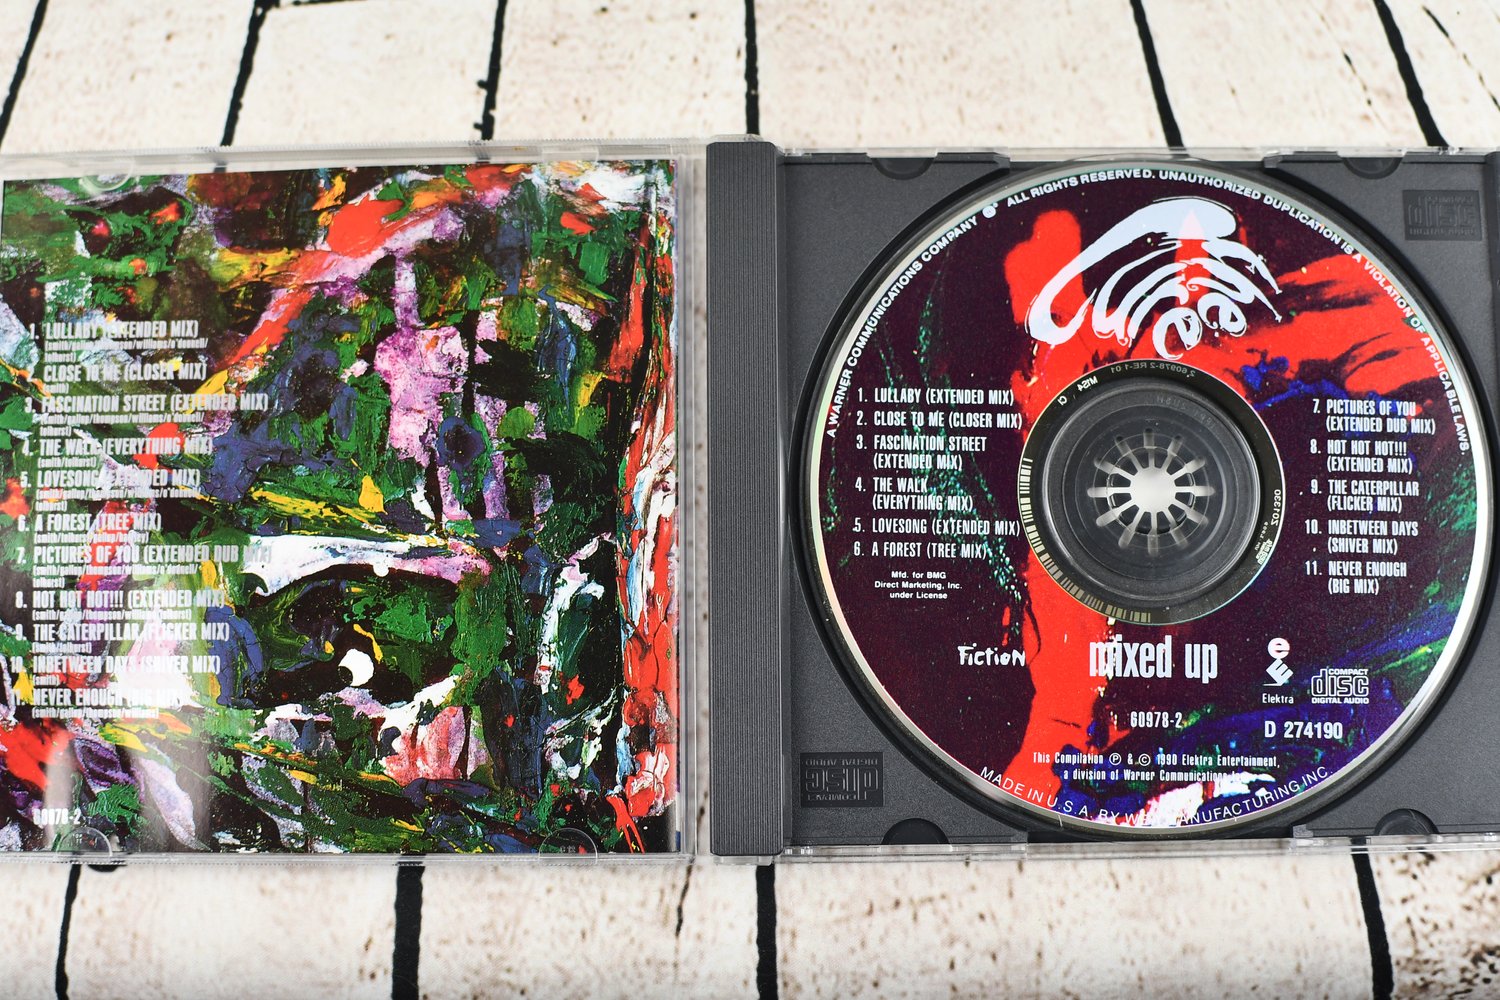 The Cure - Mixed Up CD 